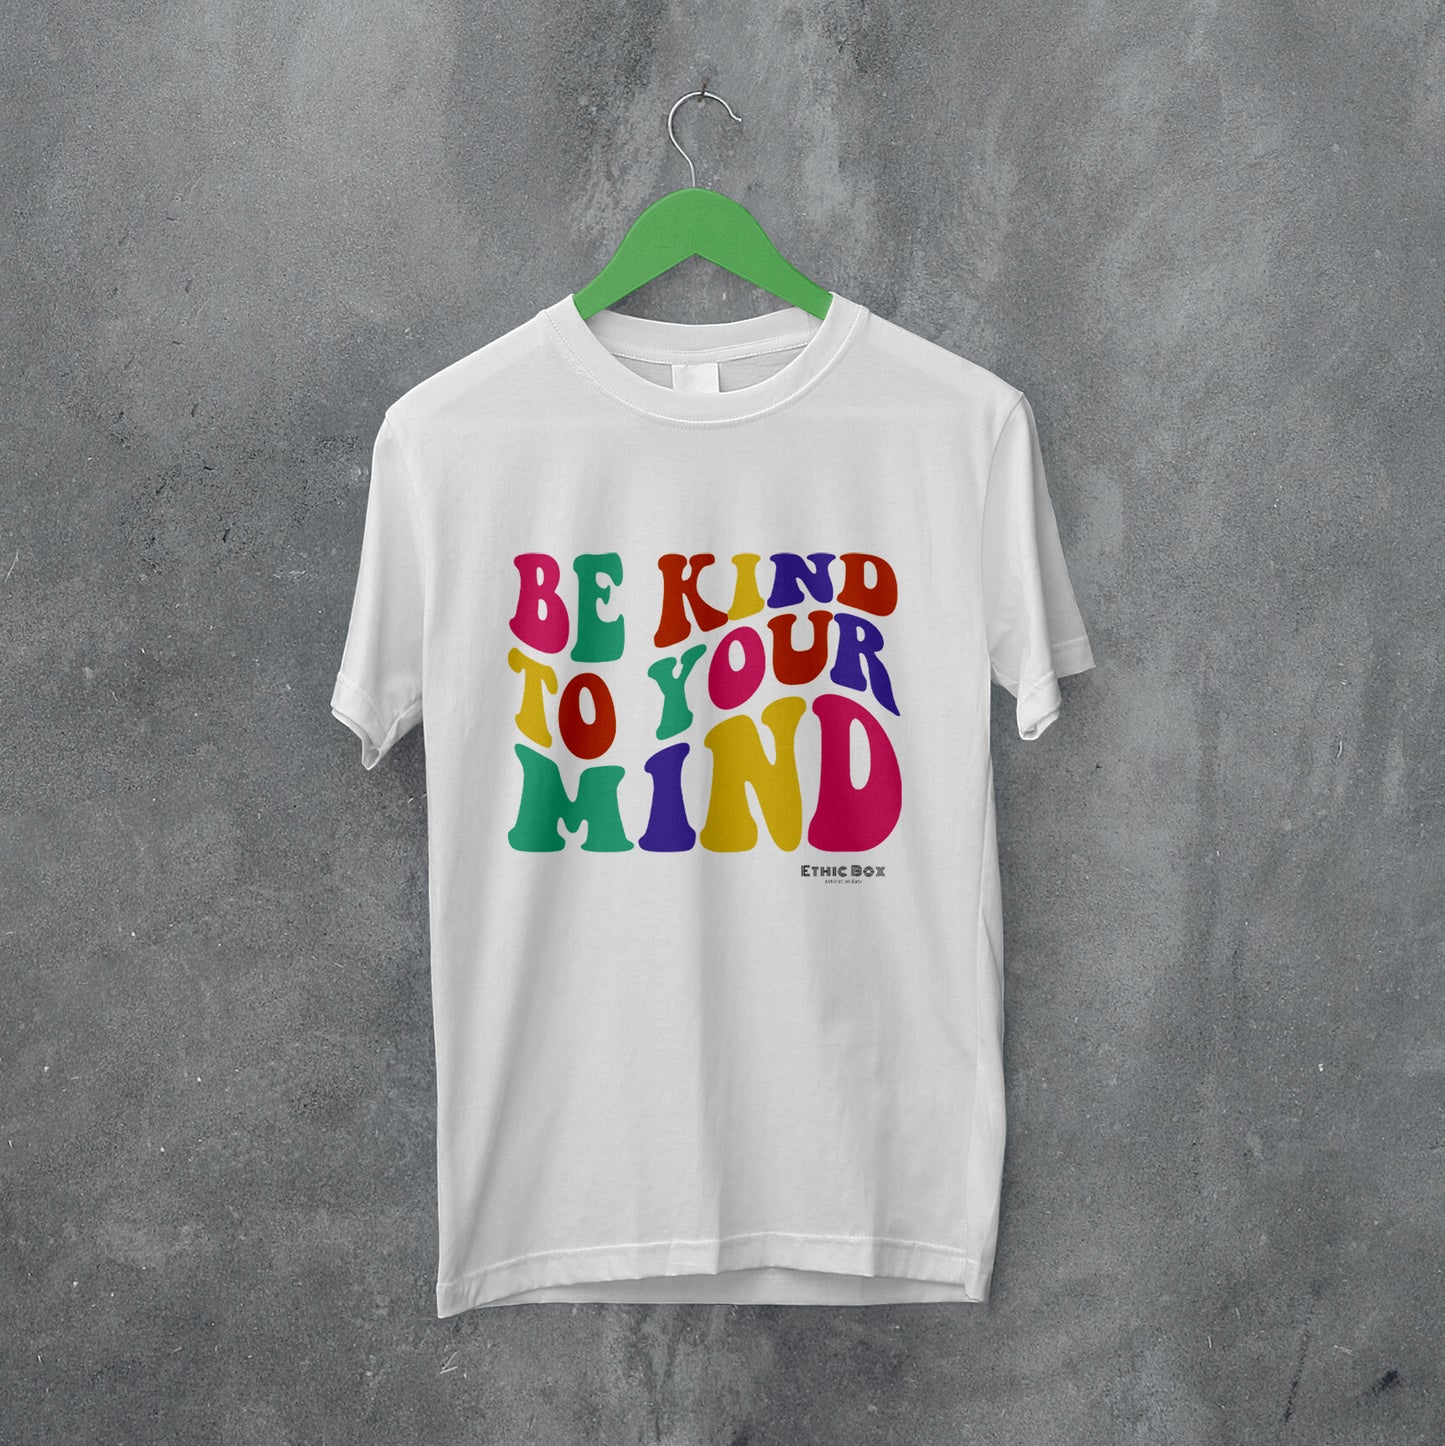 Be kind to your mind - Unisex Fit